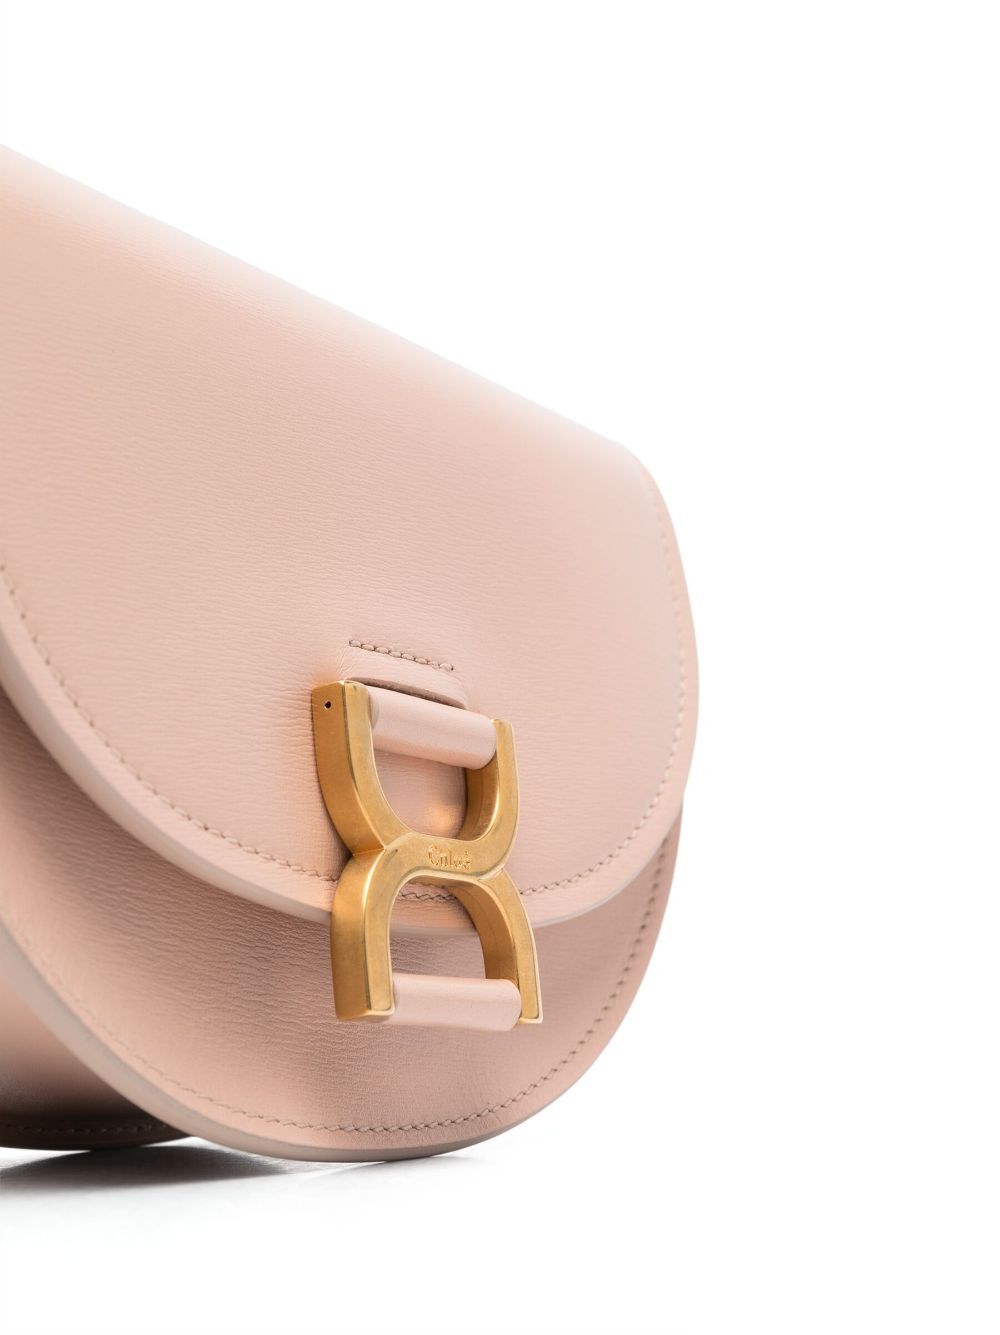 CHLOÉ Mini Marcie Tan Leather Crossbody Shoulder Bag with Gold-Tone Details